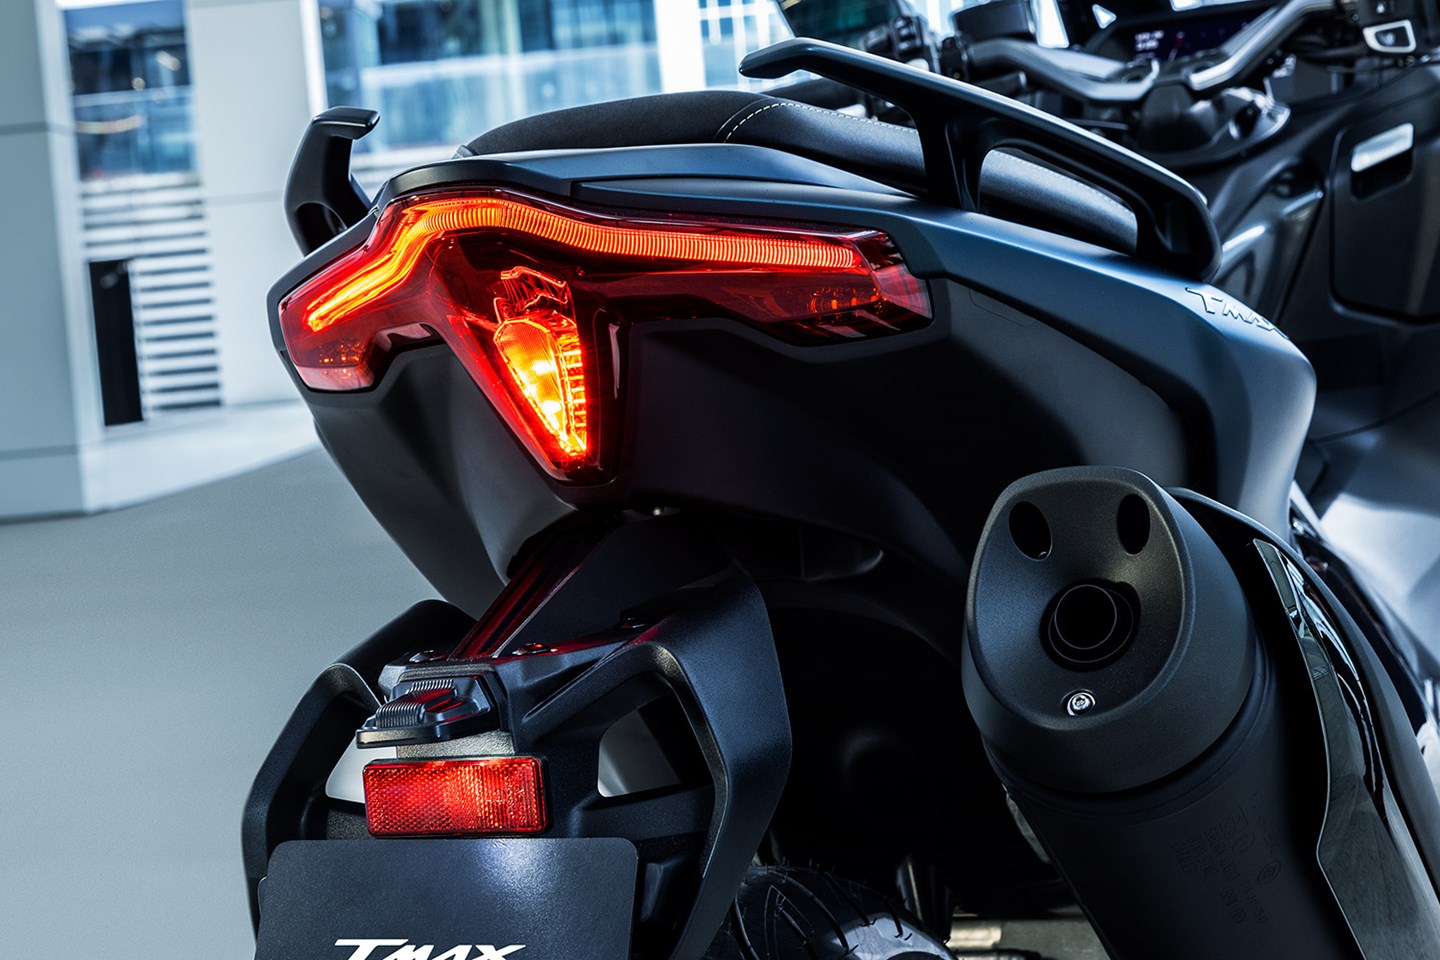 https://mcn-images.bauersecure.com/wp-images/60441/1440x960/yamaha-tmax-tech-max-05.jpg?mode=max&quality=90&scale=down